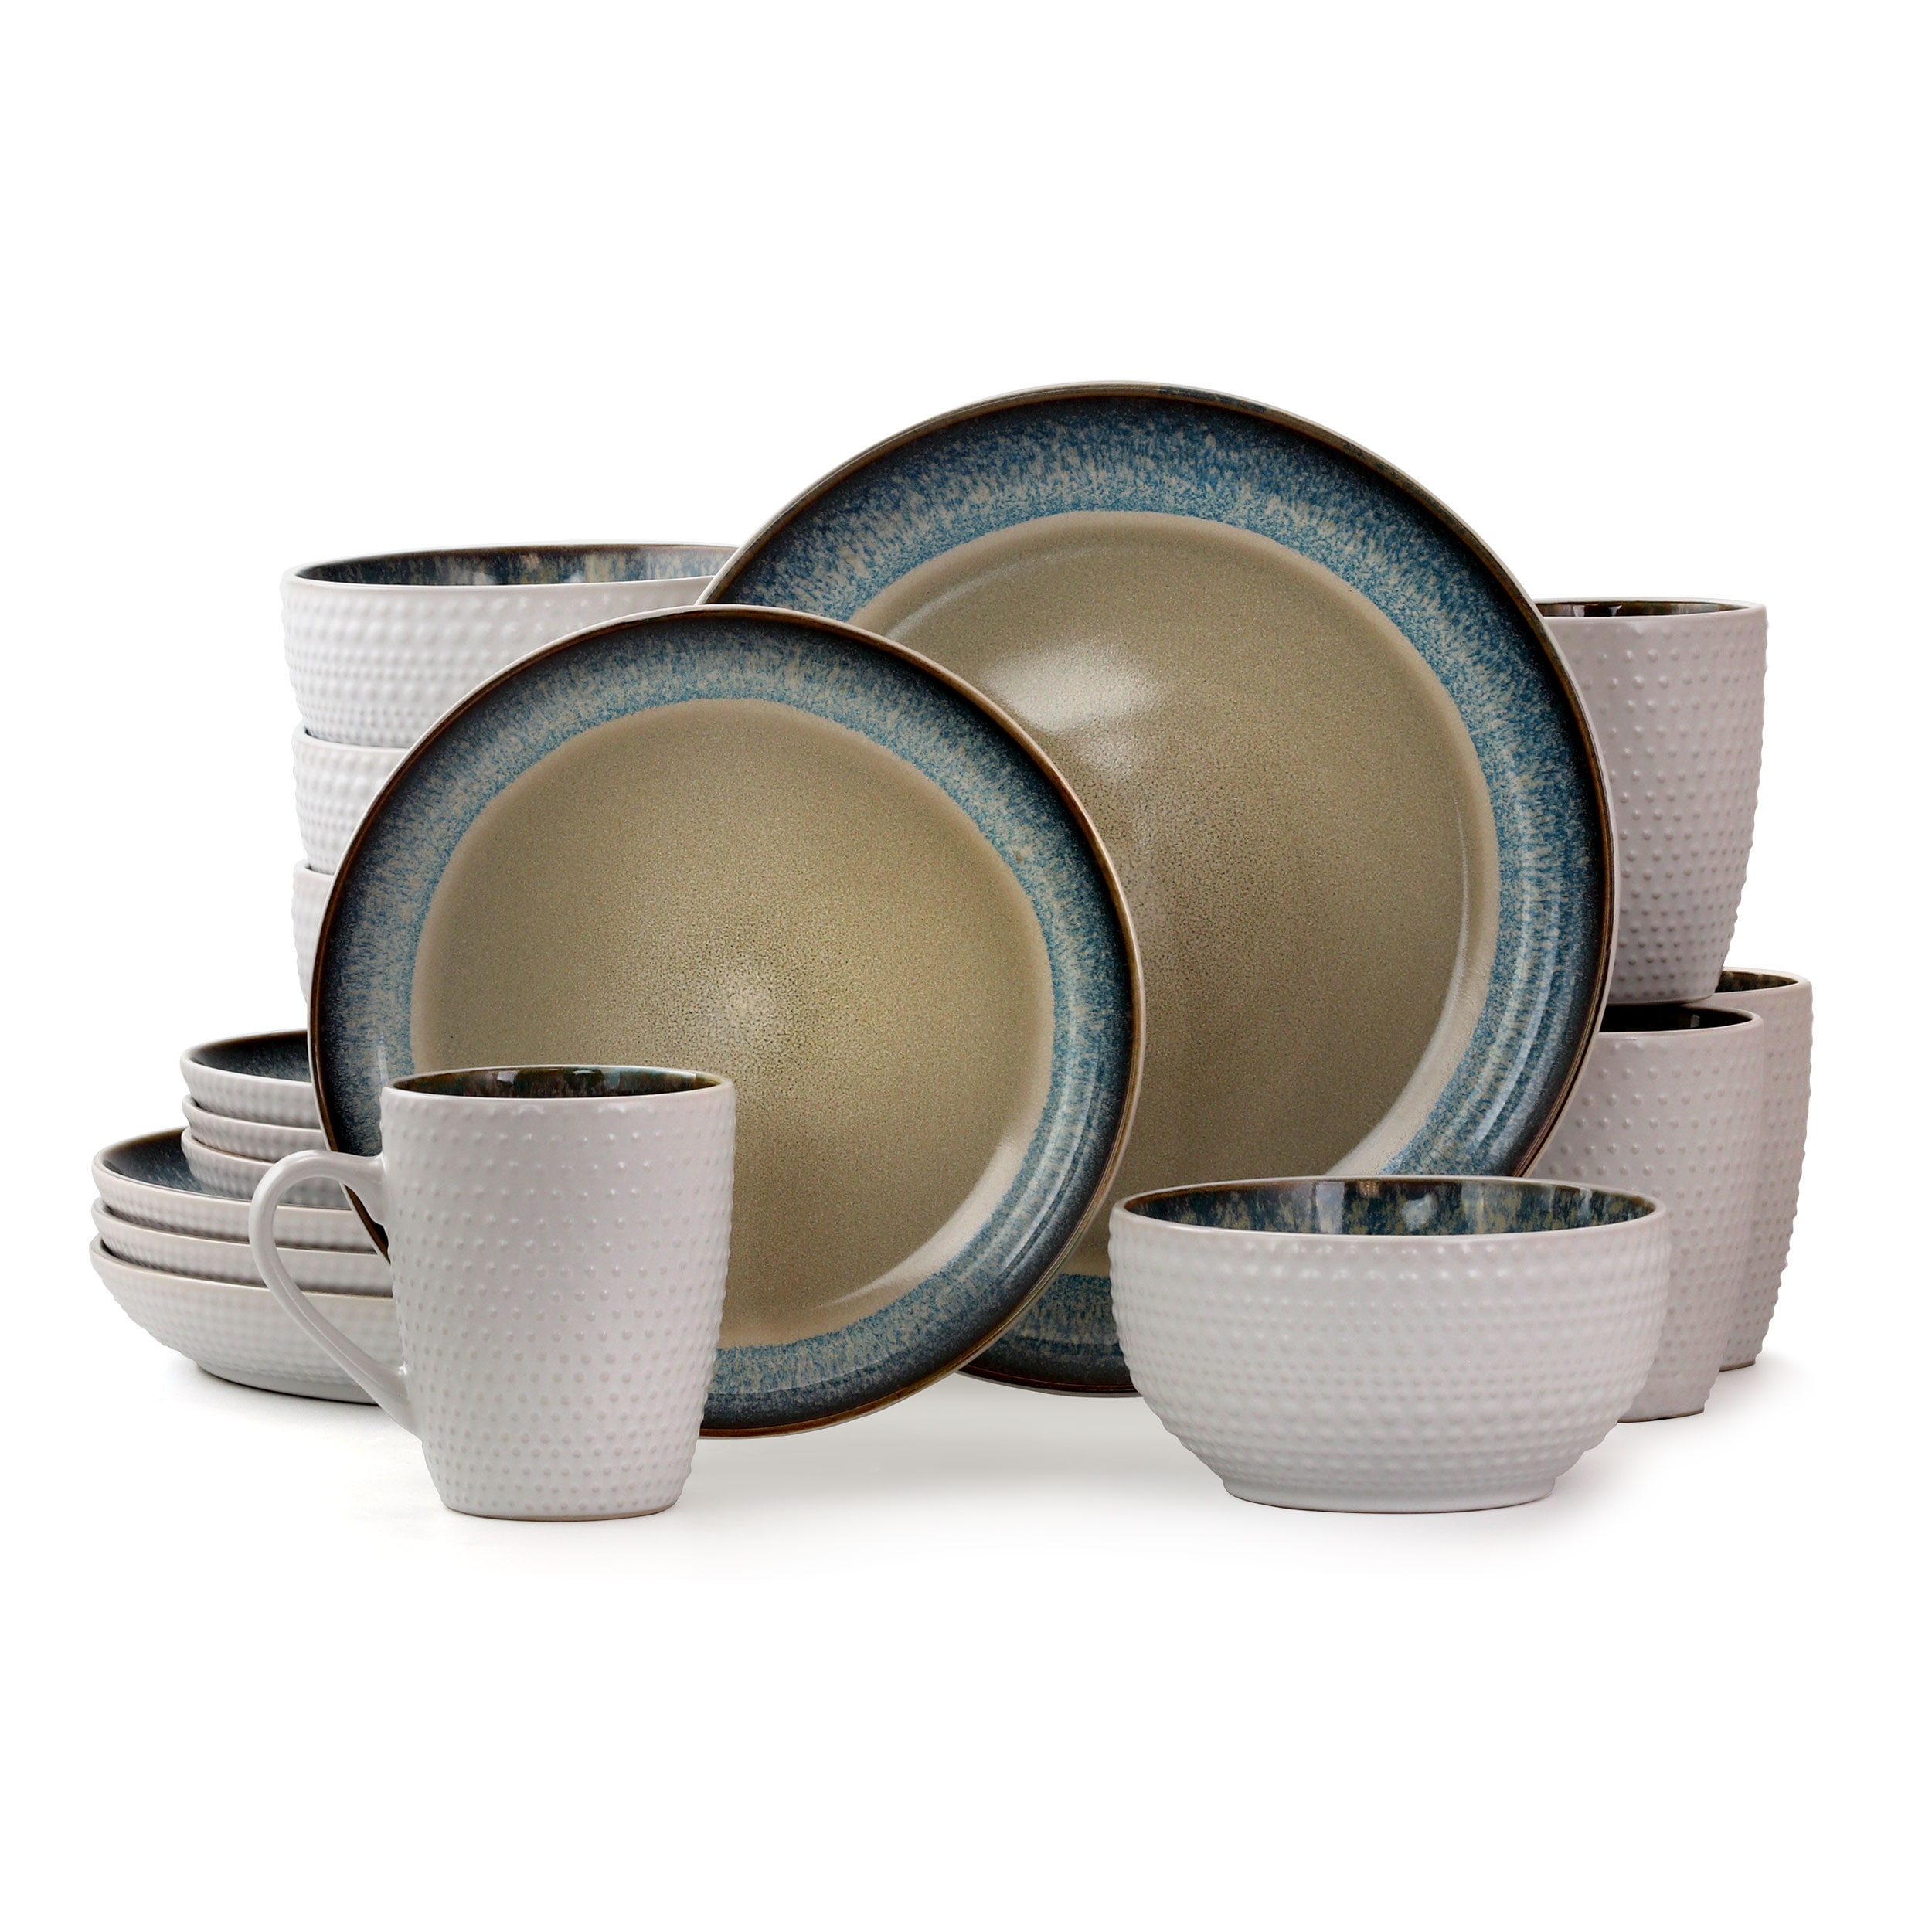 Elama Modern Dot 16 Piece Luxurious Stoneware Dinnerware with Complete Setting for 4 - N/A